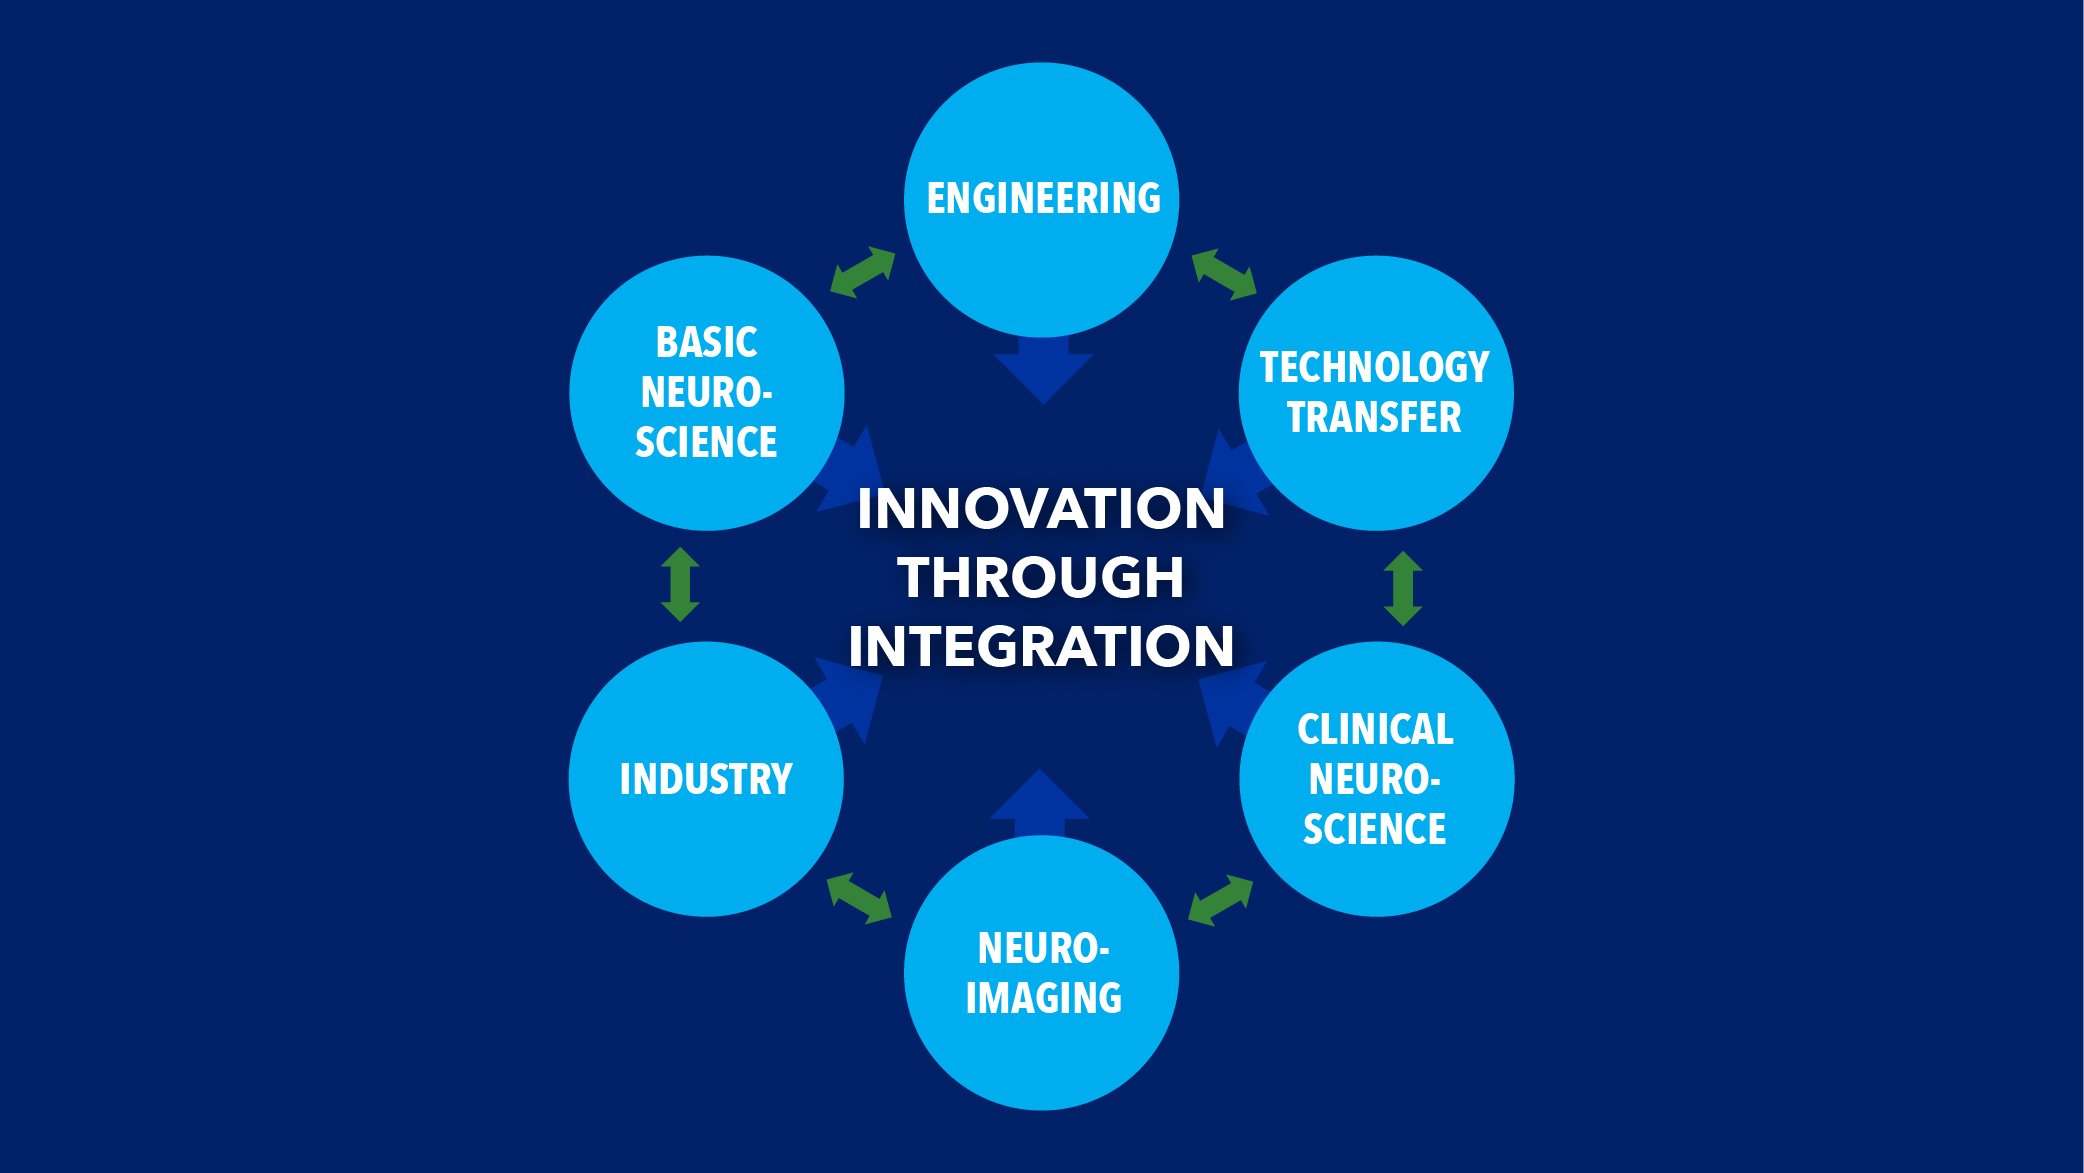 Circle diagram with Innovation through integration in the circle &amp; engineering, tech transfer, clinical neuro-science, neuroimaging, industry, &amp; basic neuro-science going around